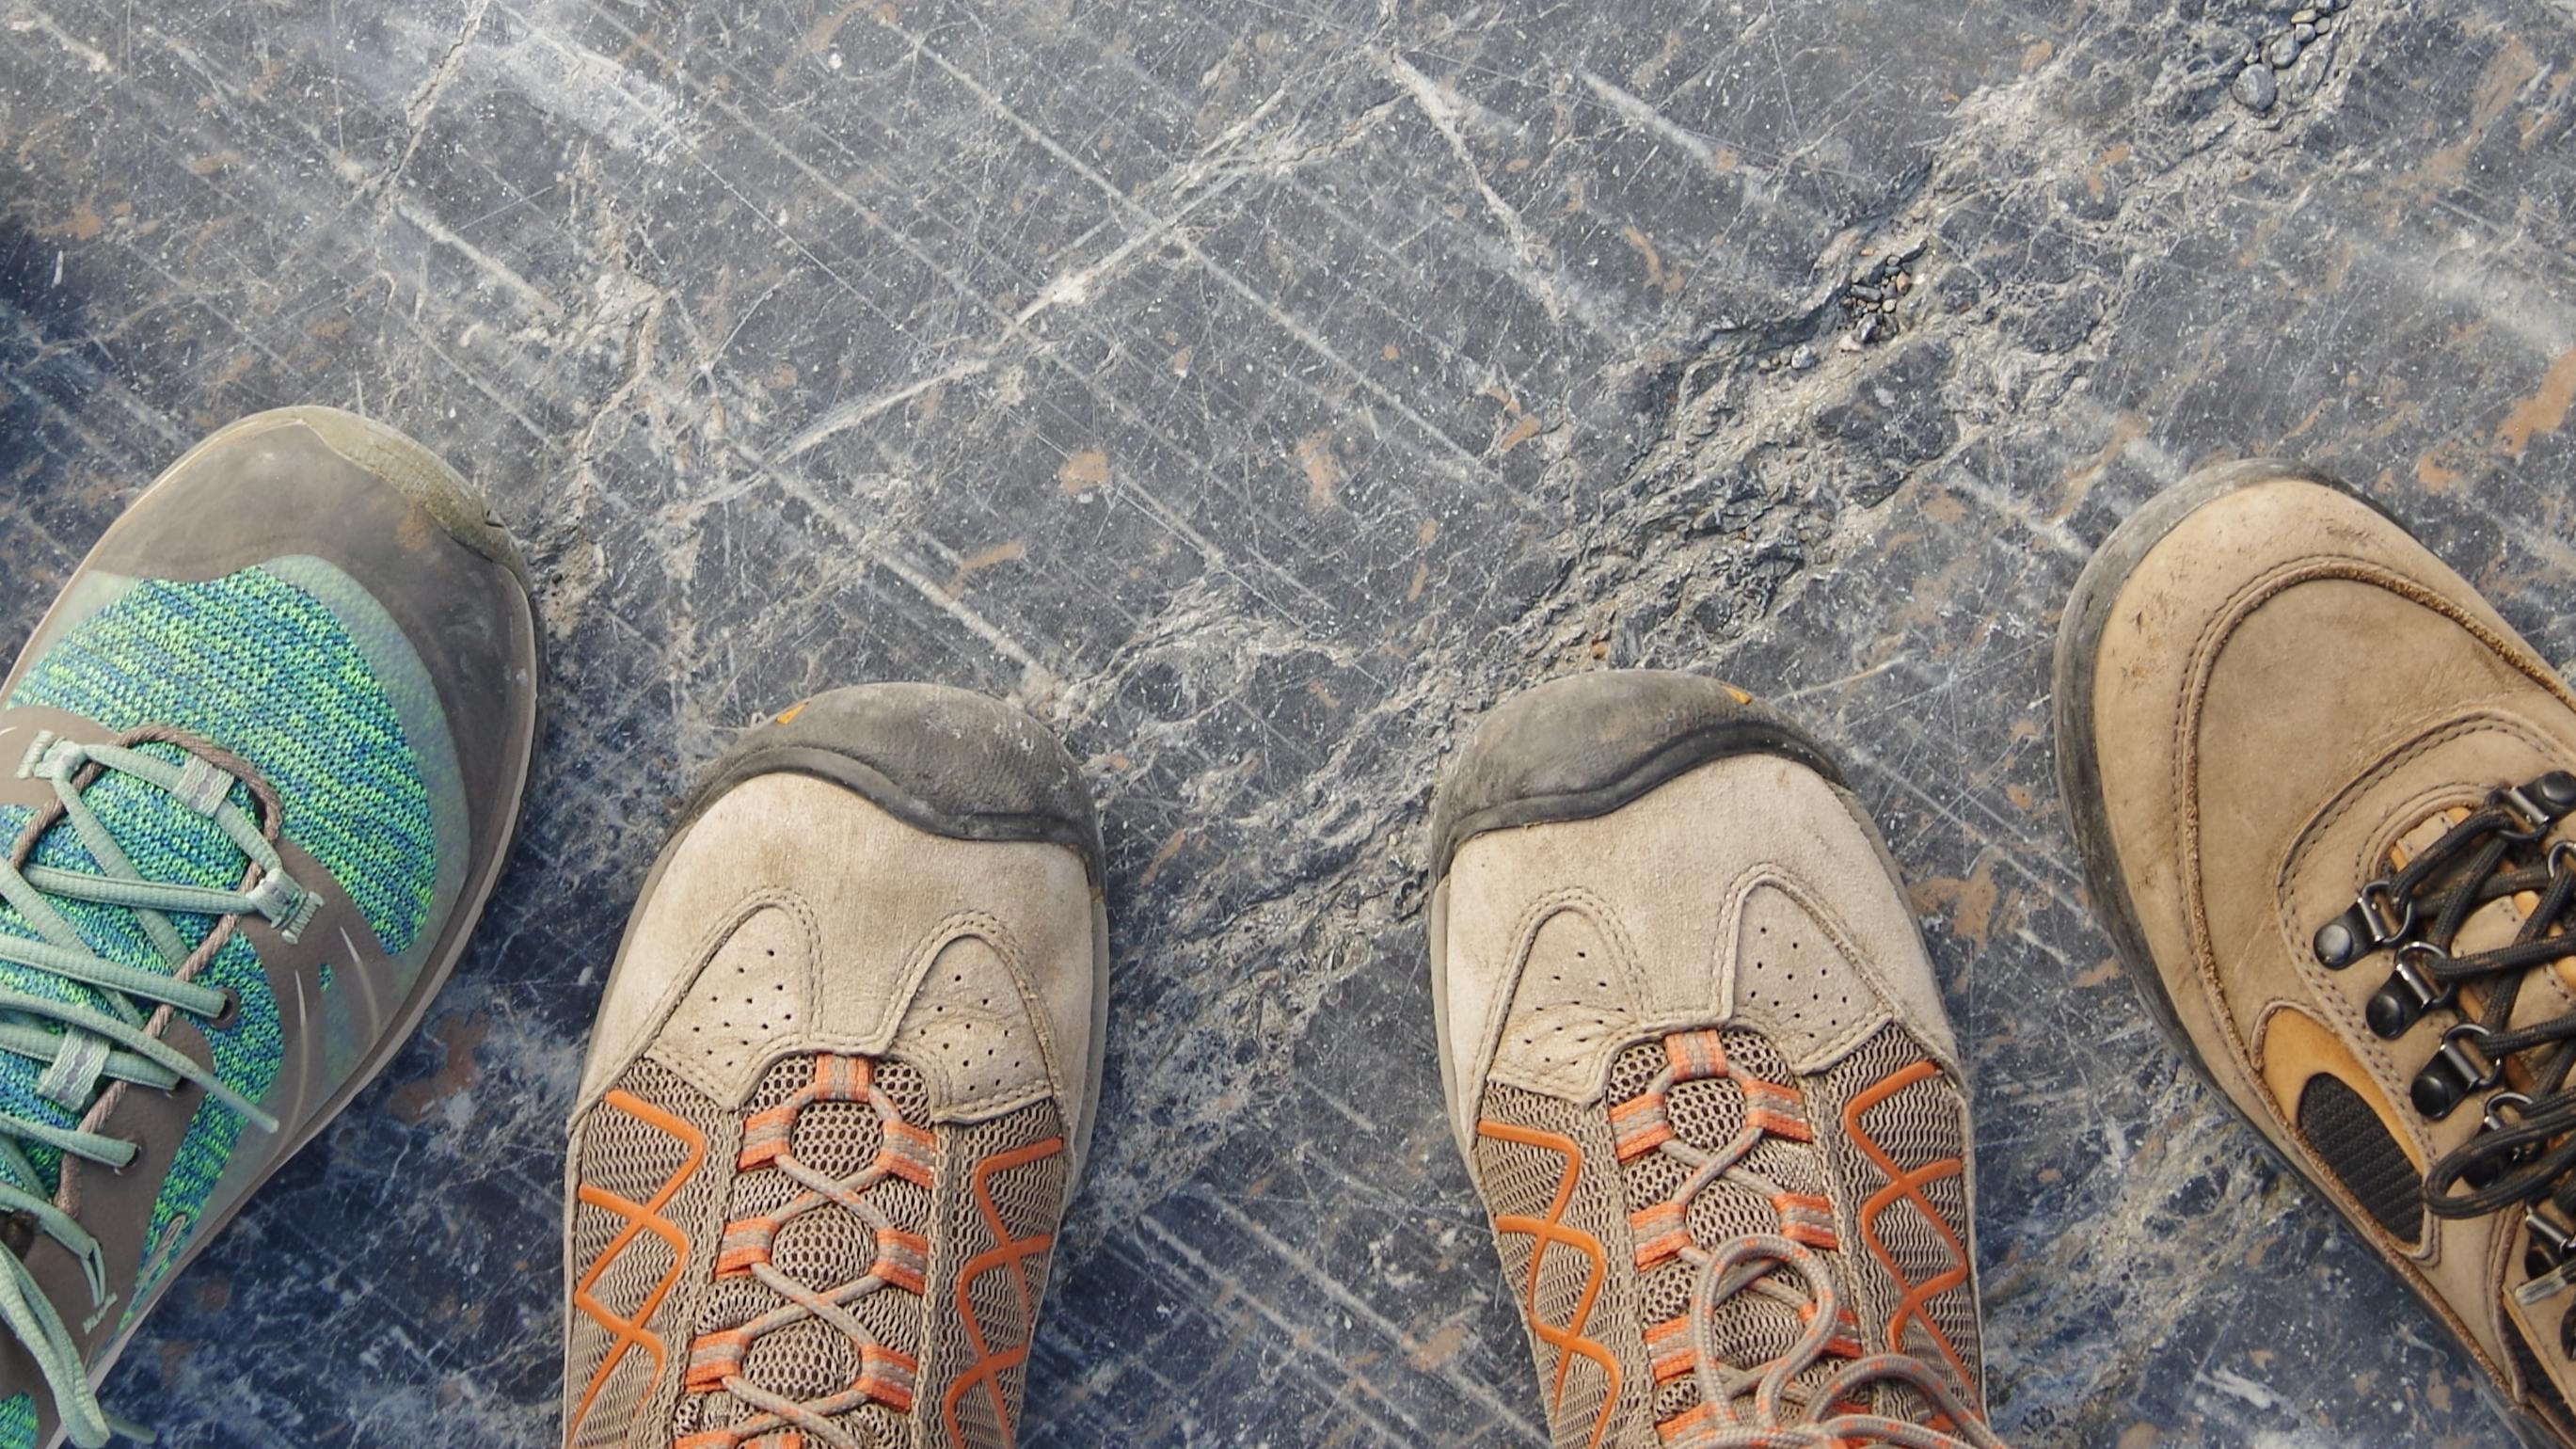 Three people stand next to each other on rock that's been scraped by a glacier. We look down at their shoes which are arranged in a semi-circle. They're wearing trail runners and hiking boots.